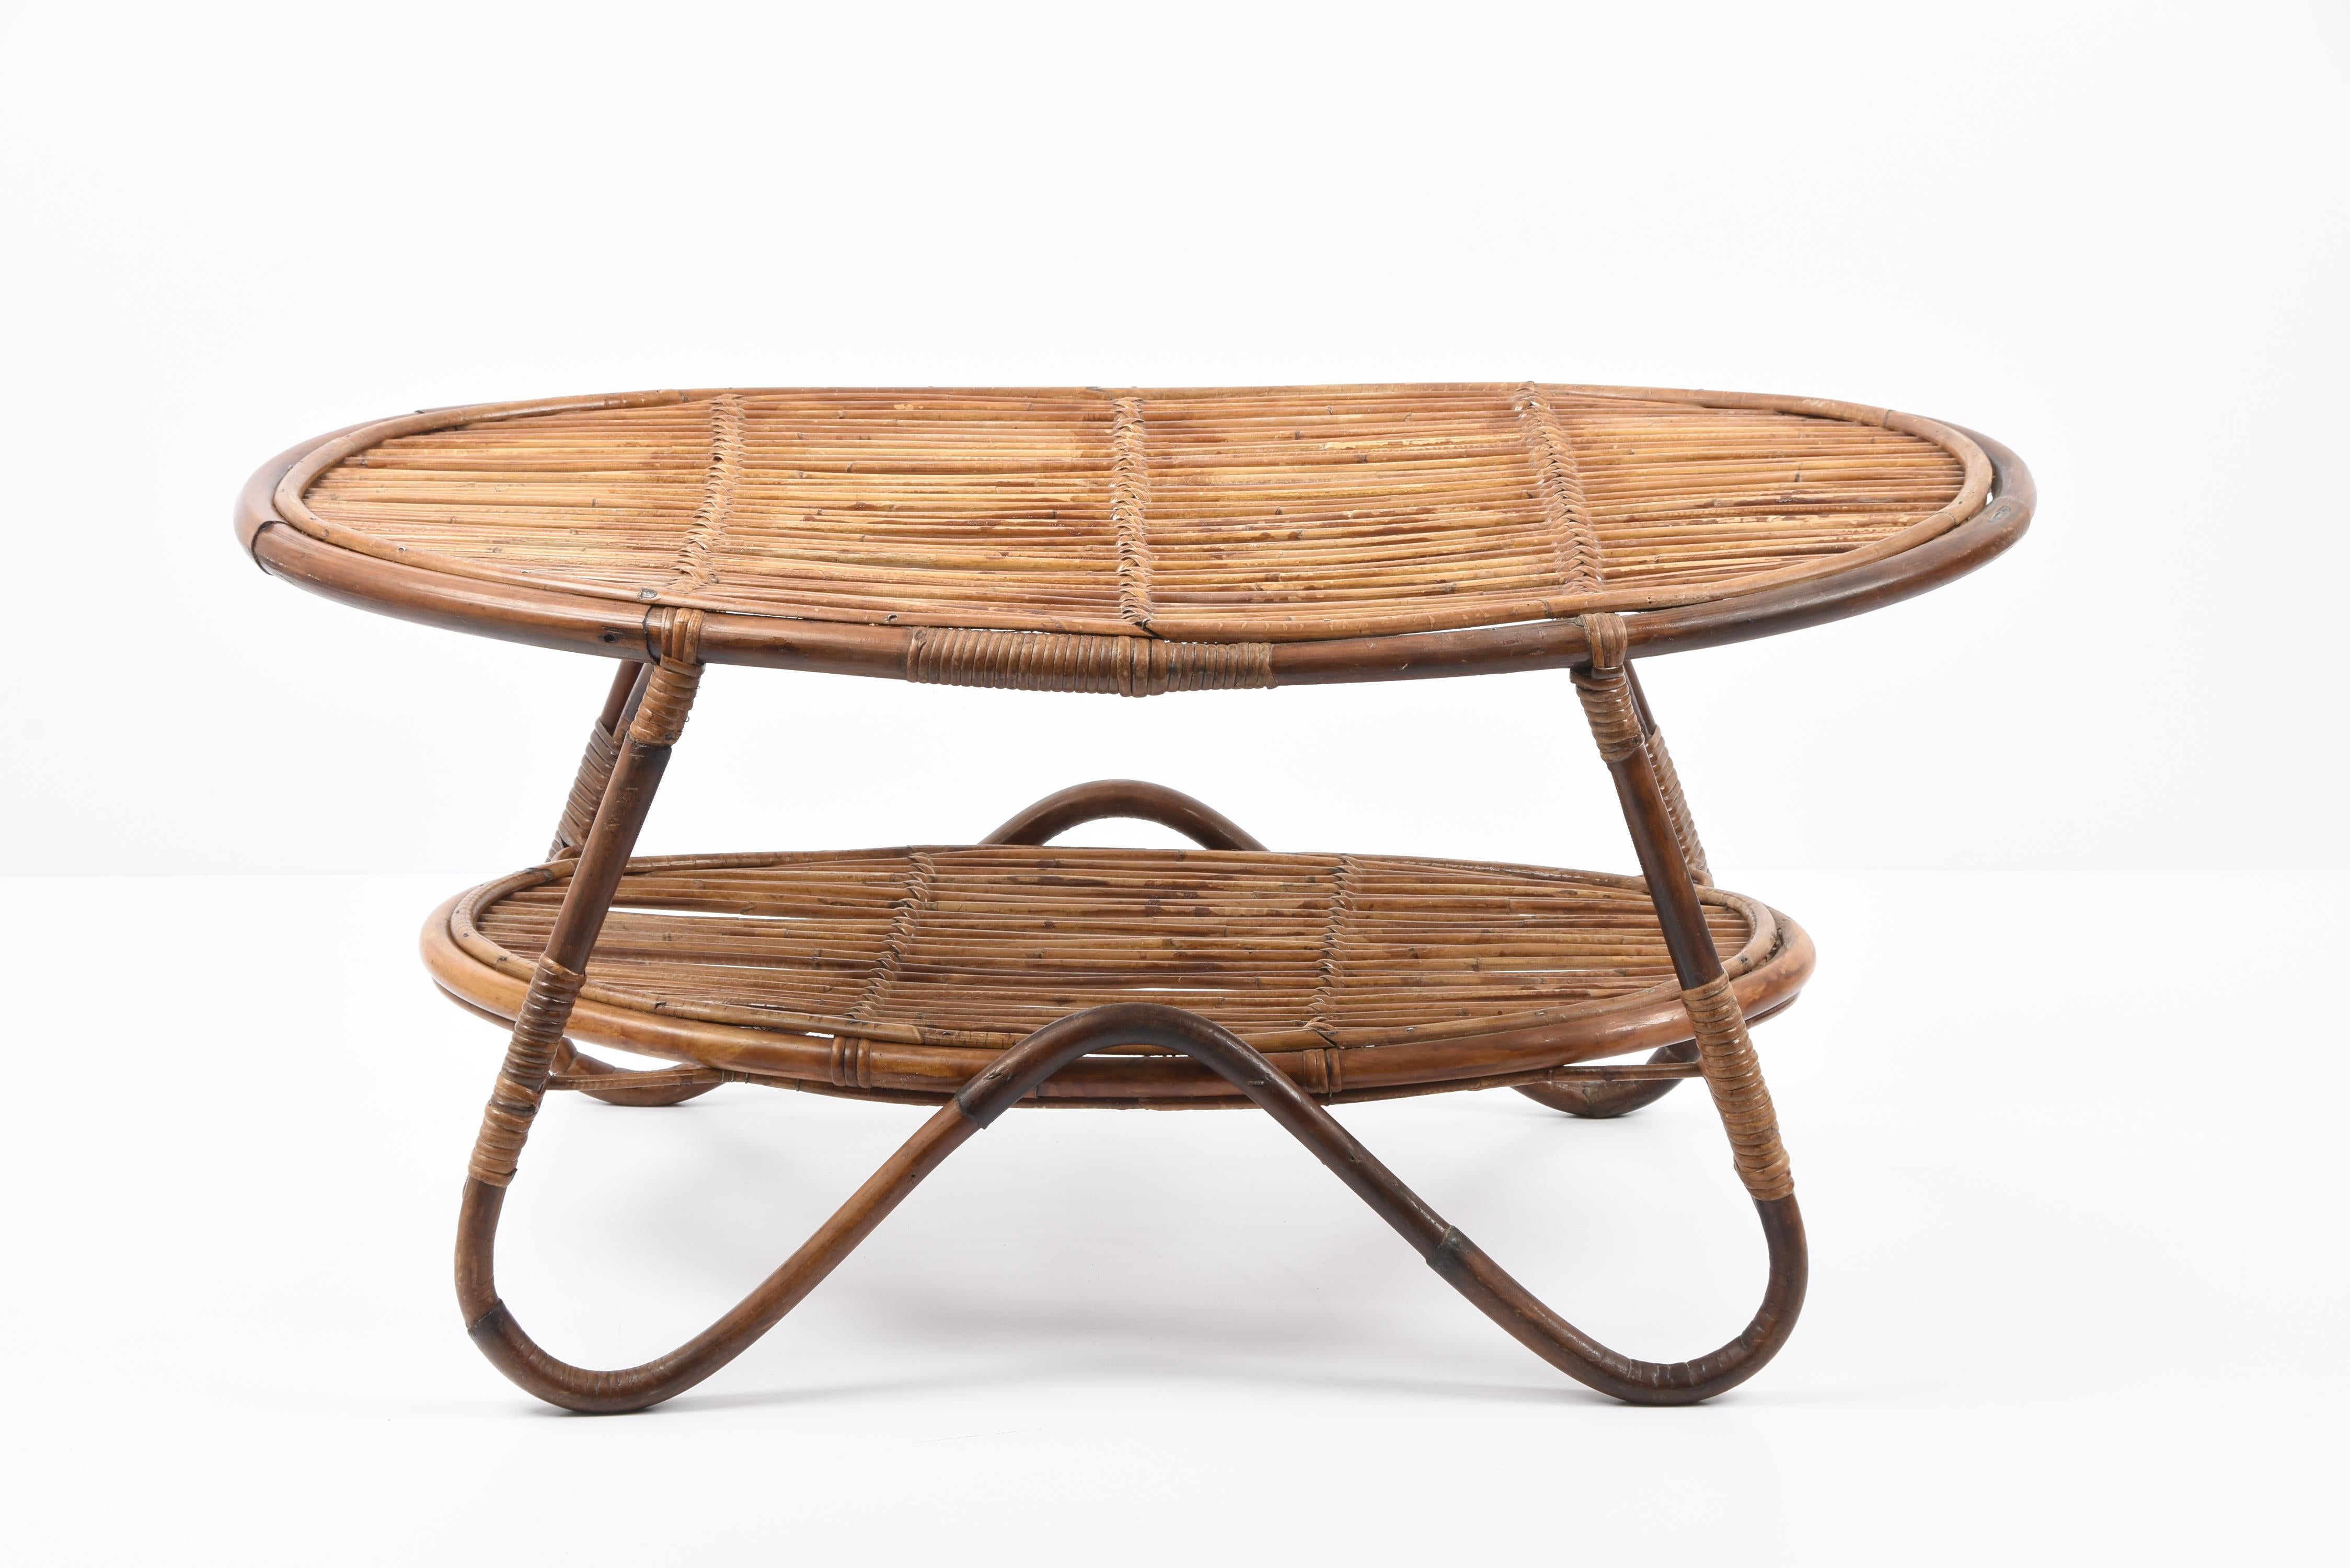 Midcentury Italian Oval Rattan and Bamboo Two Levels Coffee Table, 1950s For Sale 7